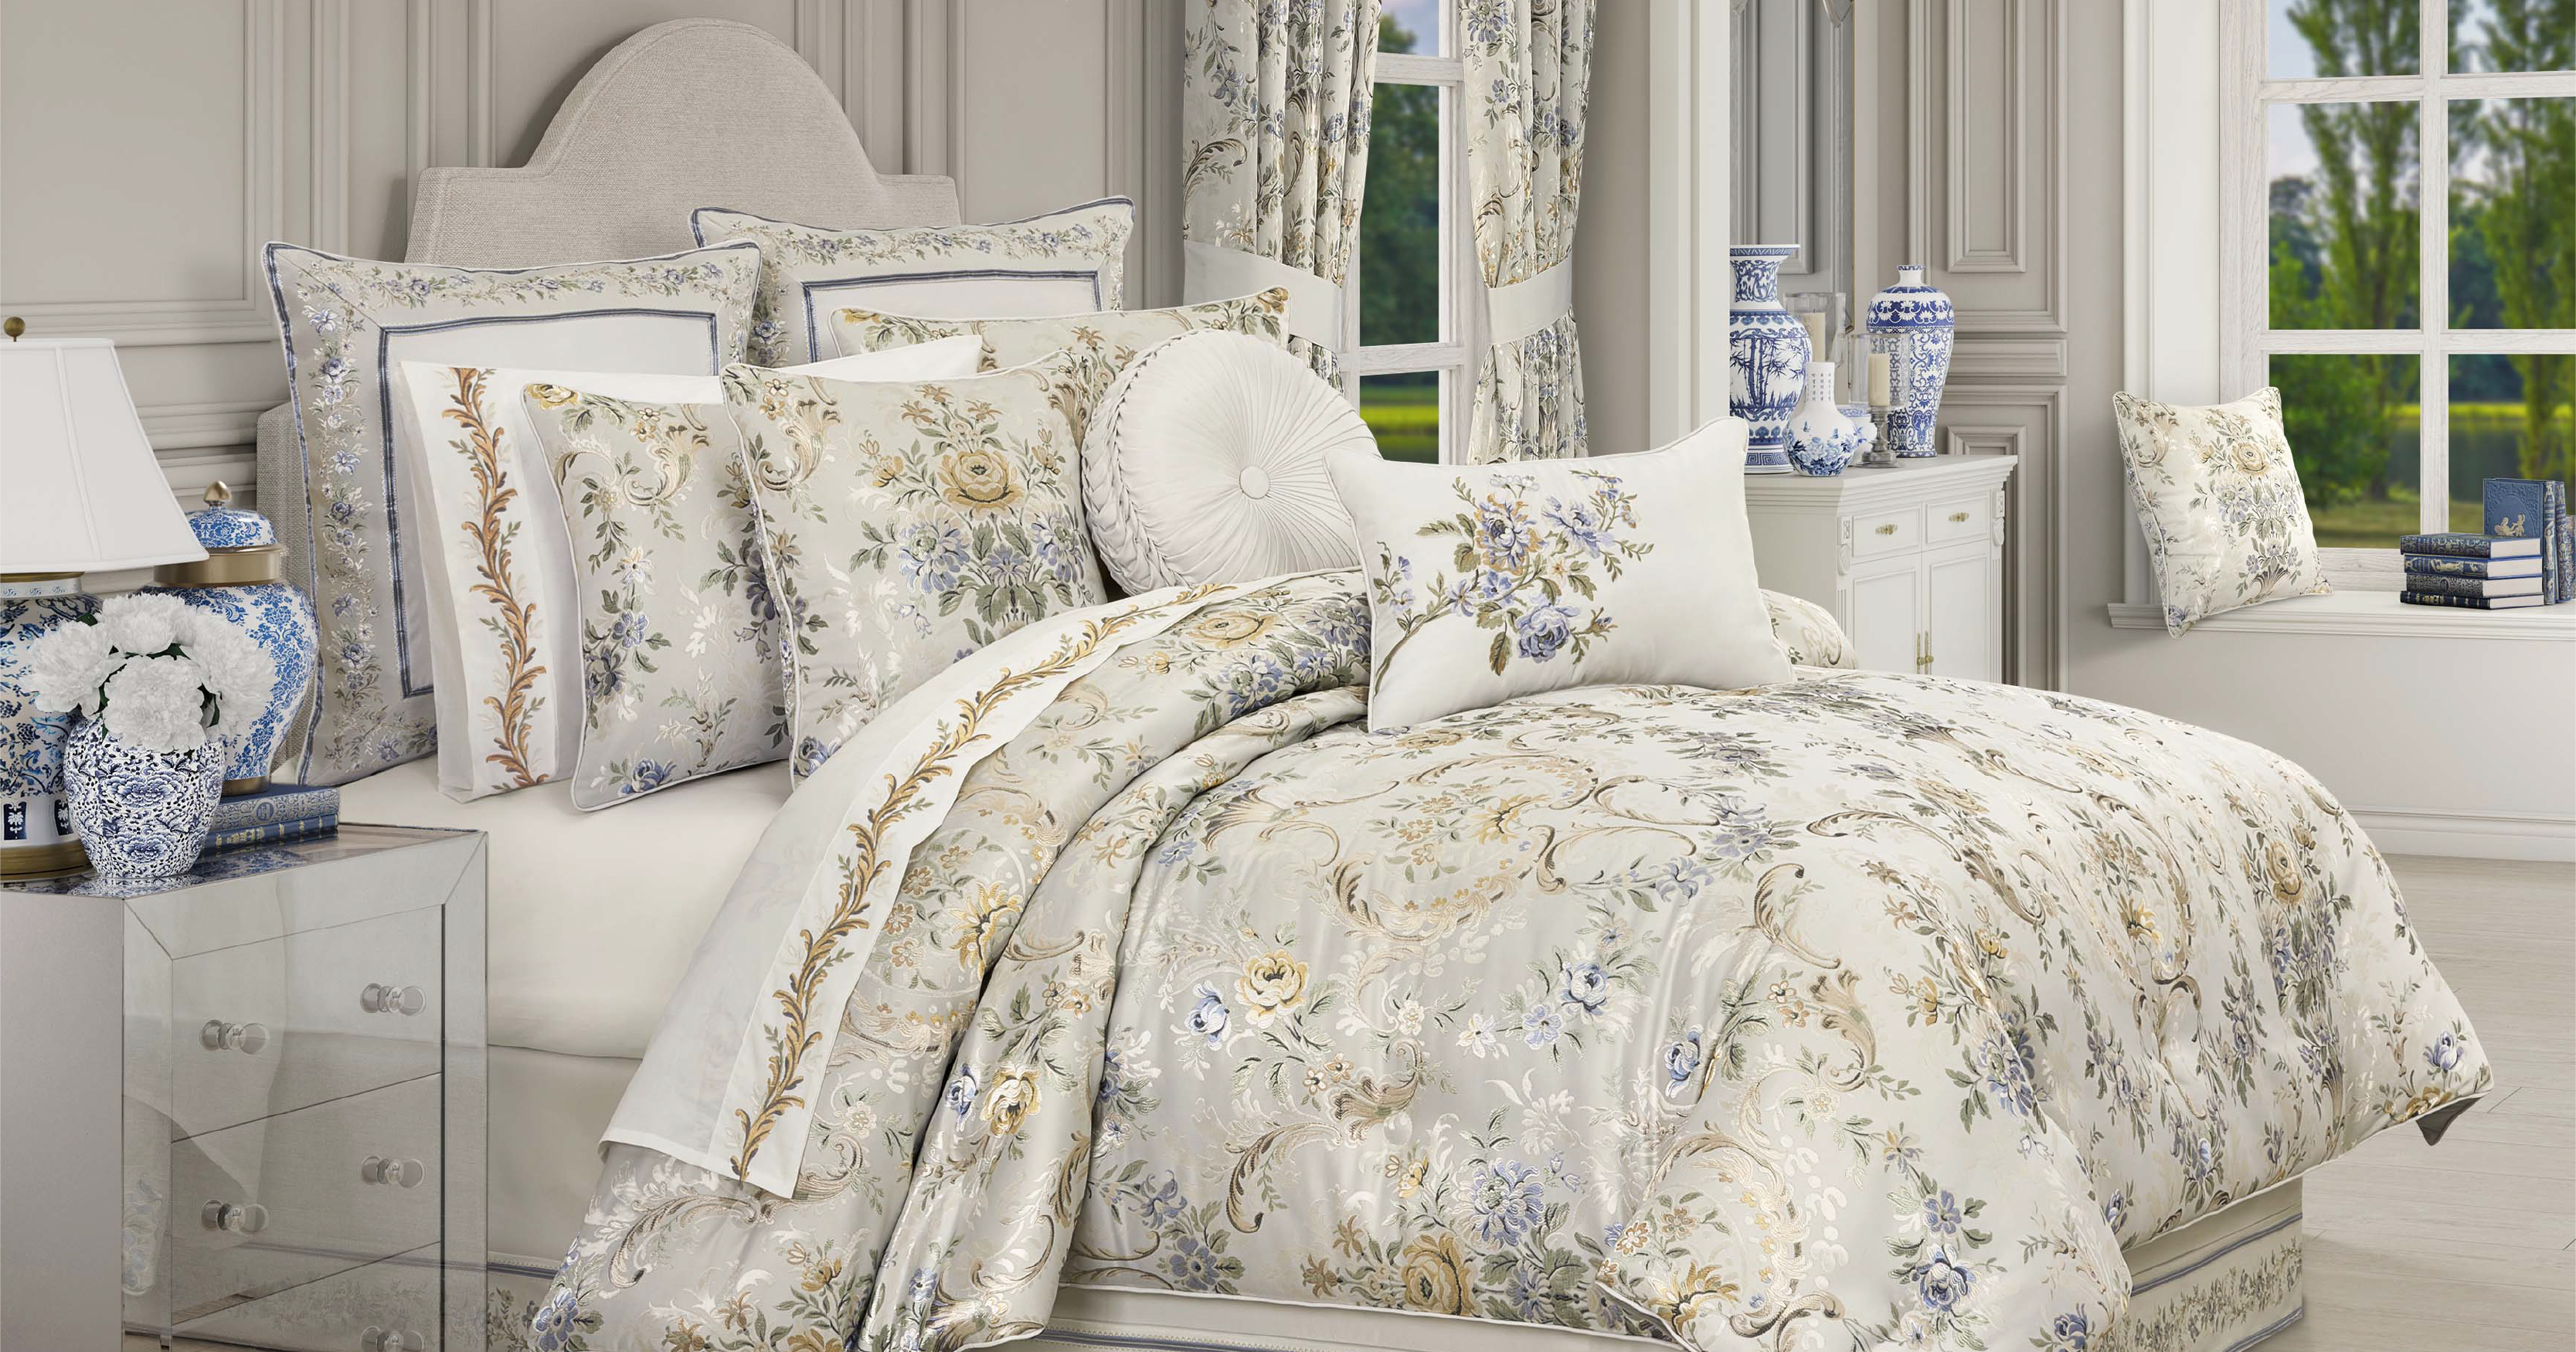 What is a twin comforter sets? – Latest Bedding